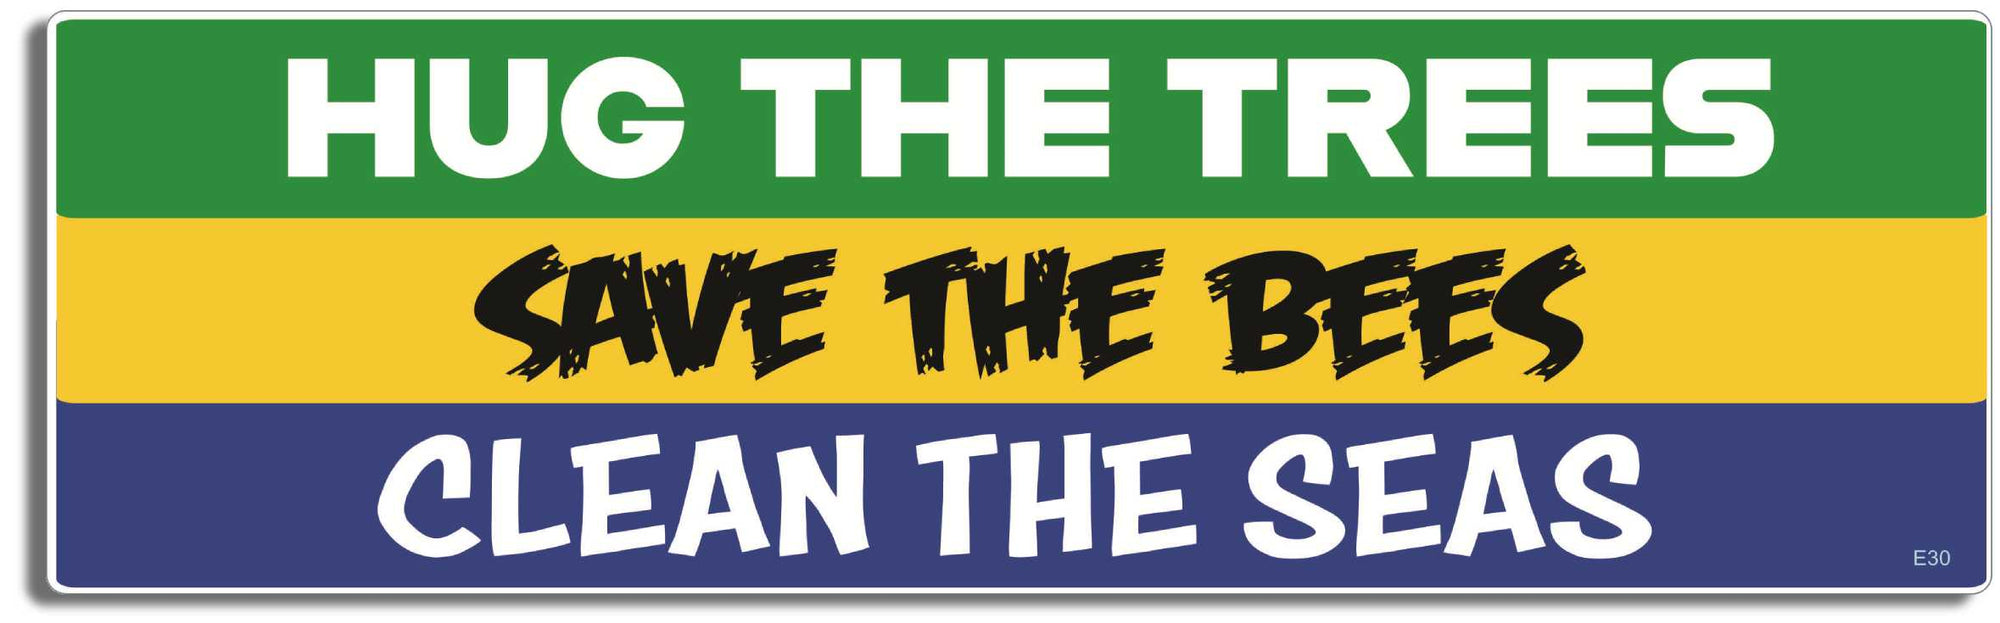 Hug the trees, save the bees, clean the seas - 3" x 10 -  Decal Bumper Sticker-environmental Bumper Sticker Car Magnet Hug the trees, save the bees, clean-  Decal for carsconservational, earth day, save earth